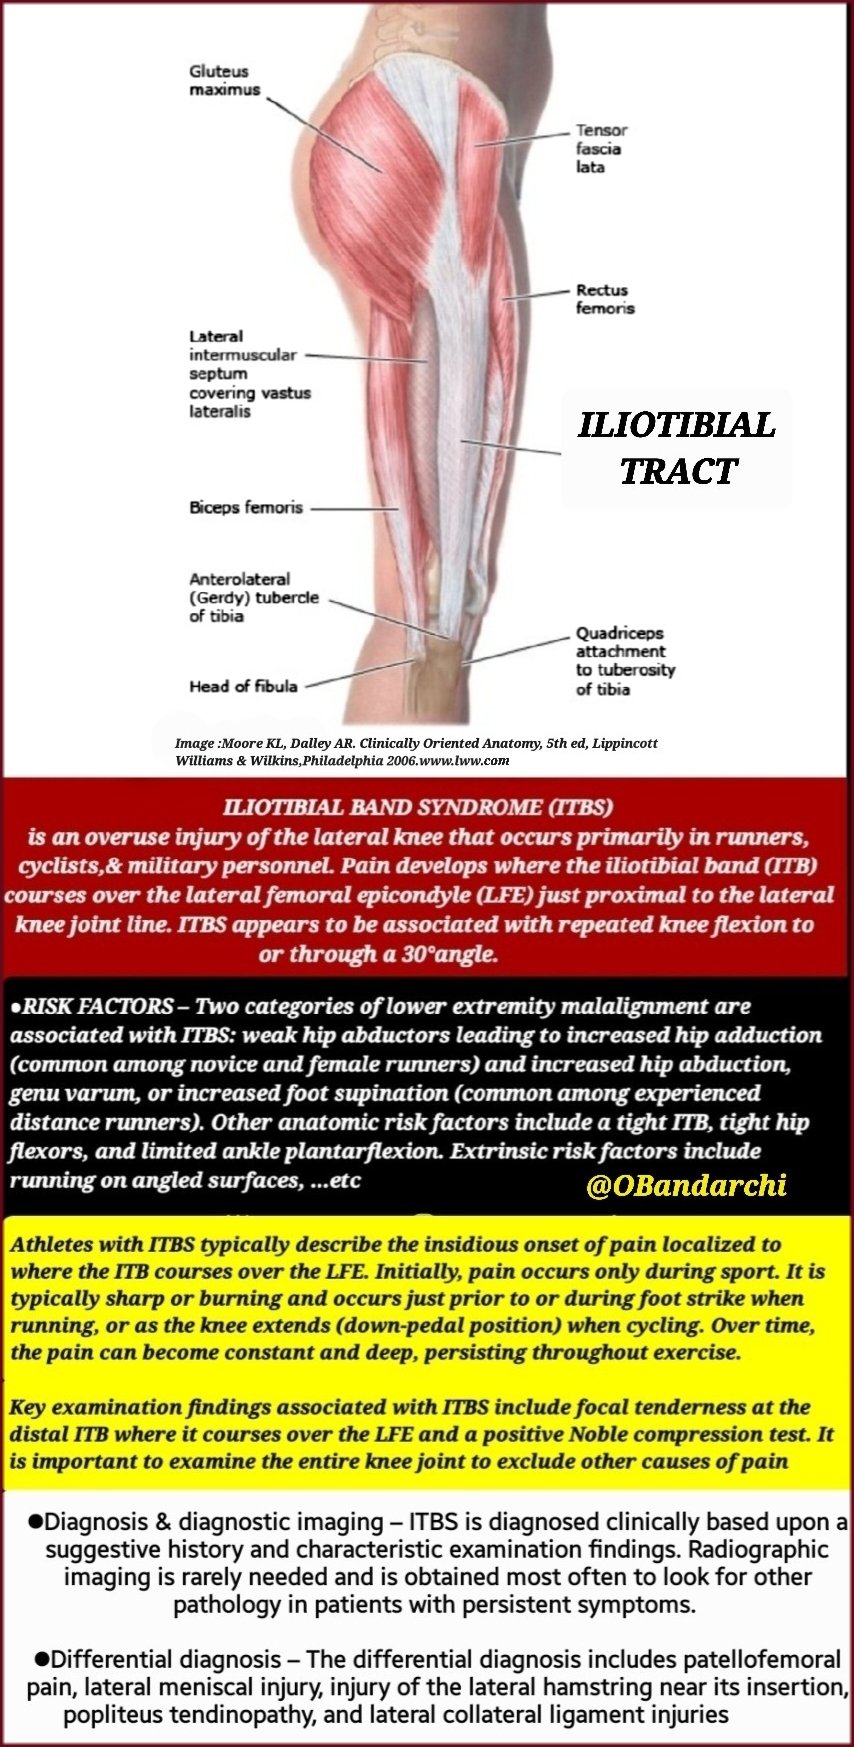 Dr. OMID BANDARCHI on X: Iliotibial band syndrome(ITBS): an